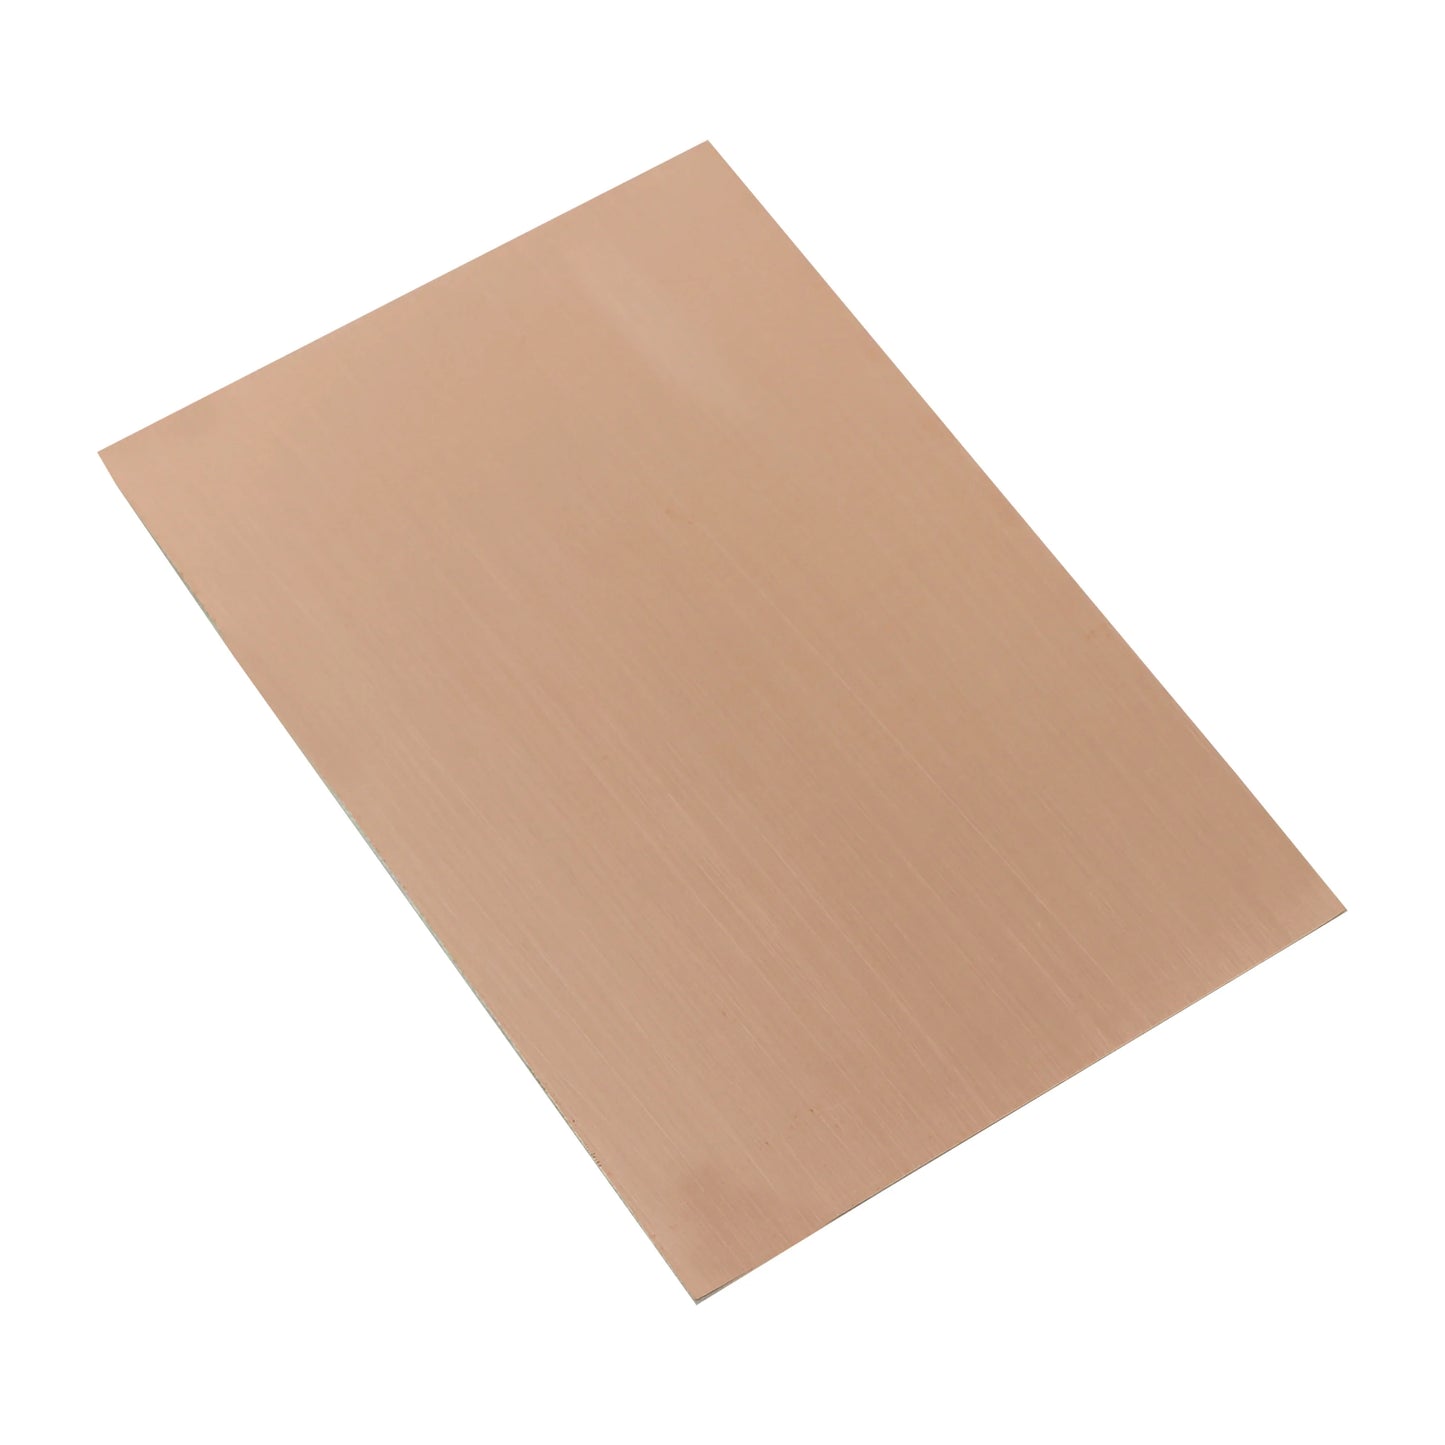 1.6 mm Thick DOUBLE Sided Copper Clad Laminate Circuit Board 6 x 4 Inch (FR4 Glass Epoxy PCB) - 5 Units